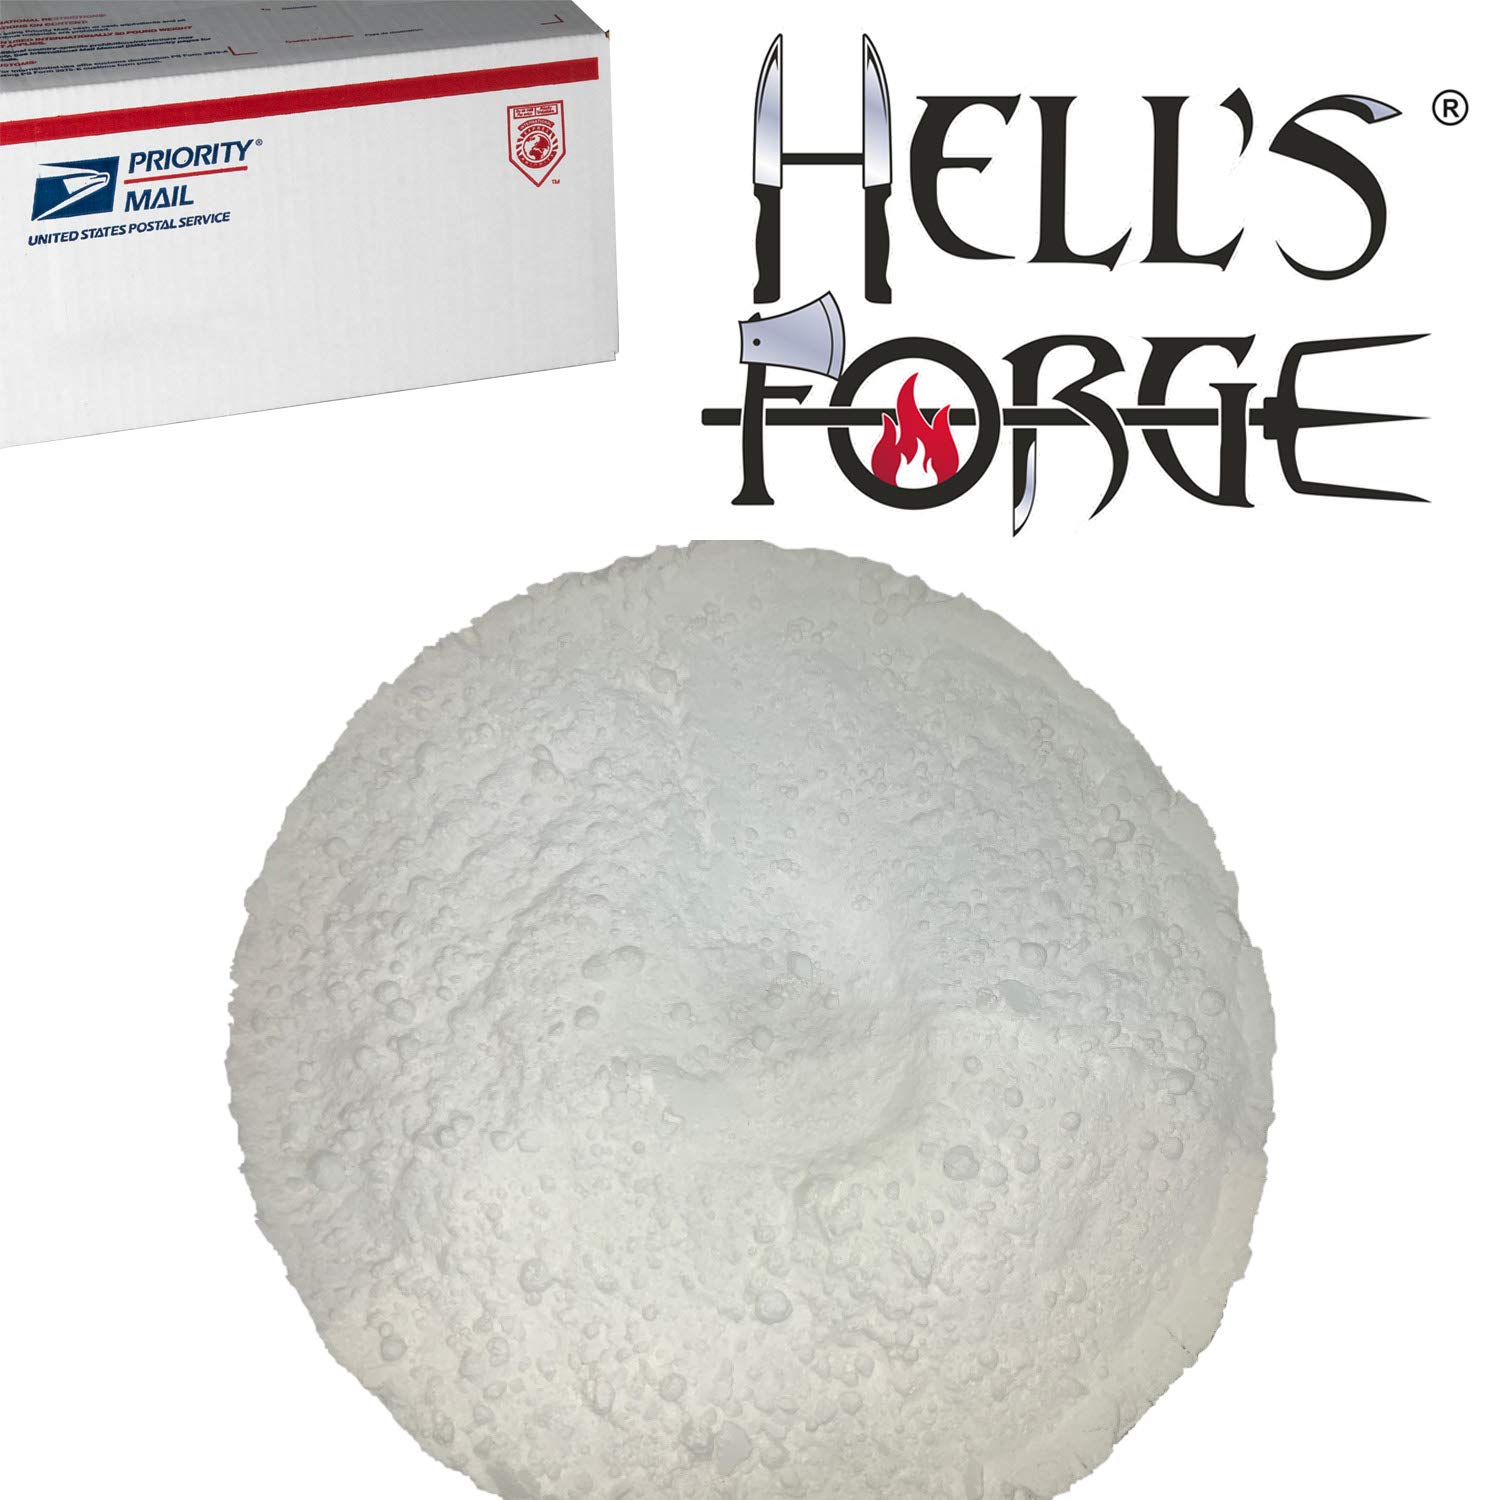 Generic Hellcote 3000 Refractory Cement for Ceramic Fiber Blankets to be Used on Any Brand Including All Hell's Forge Brand Propane For